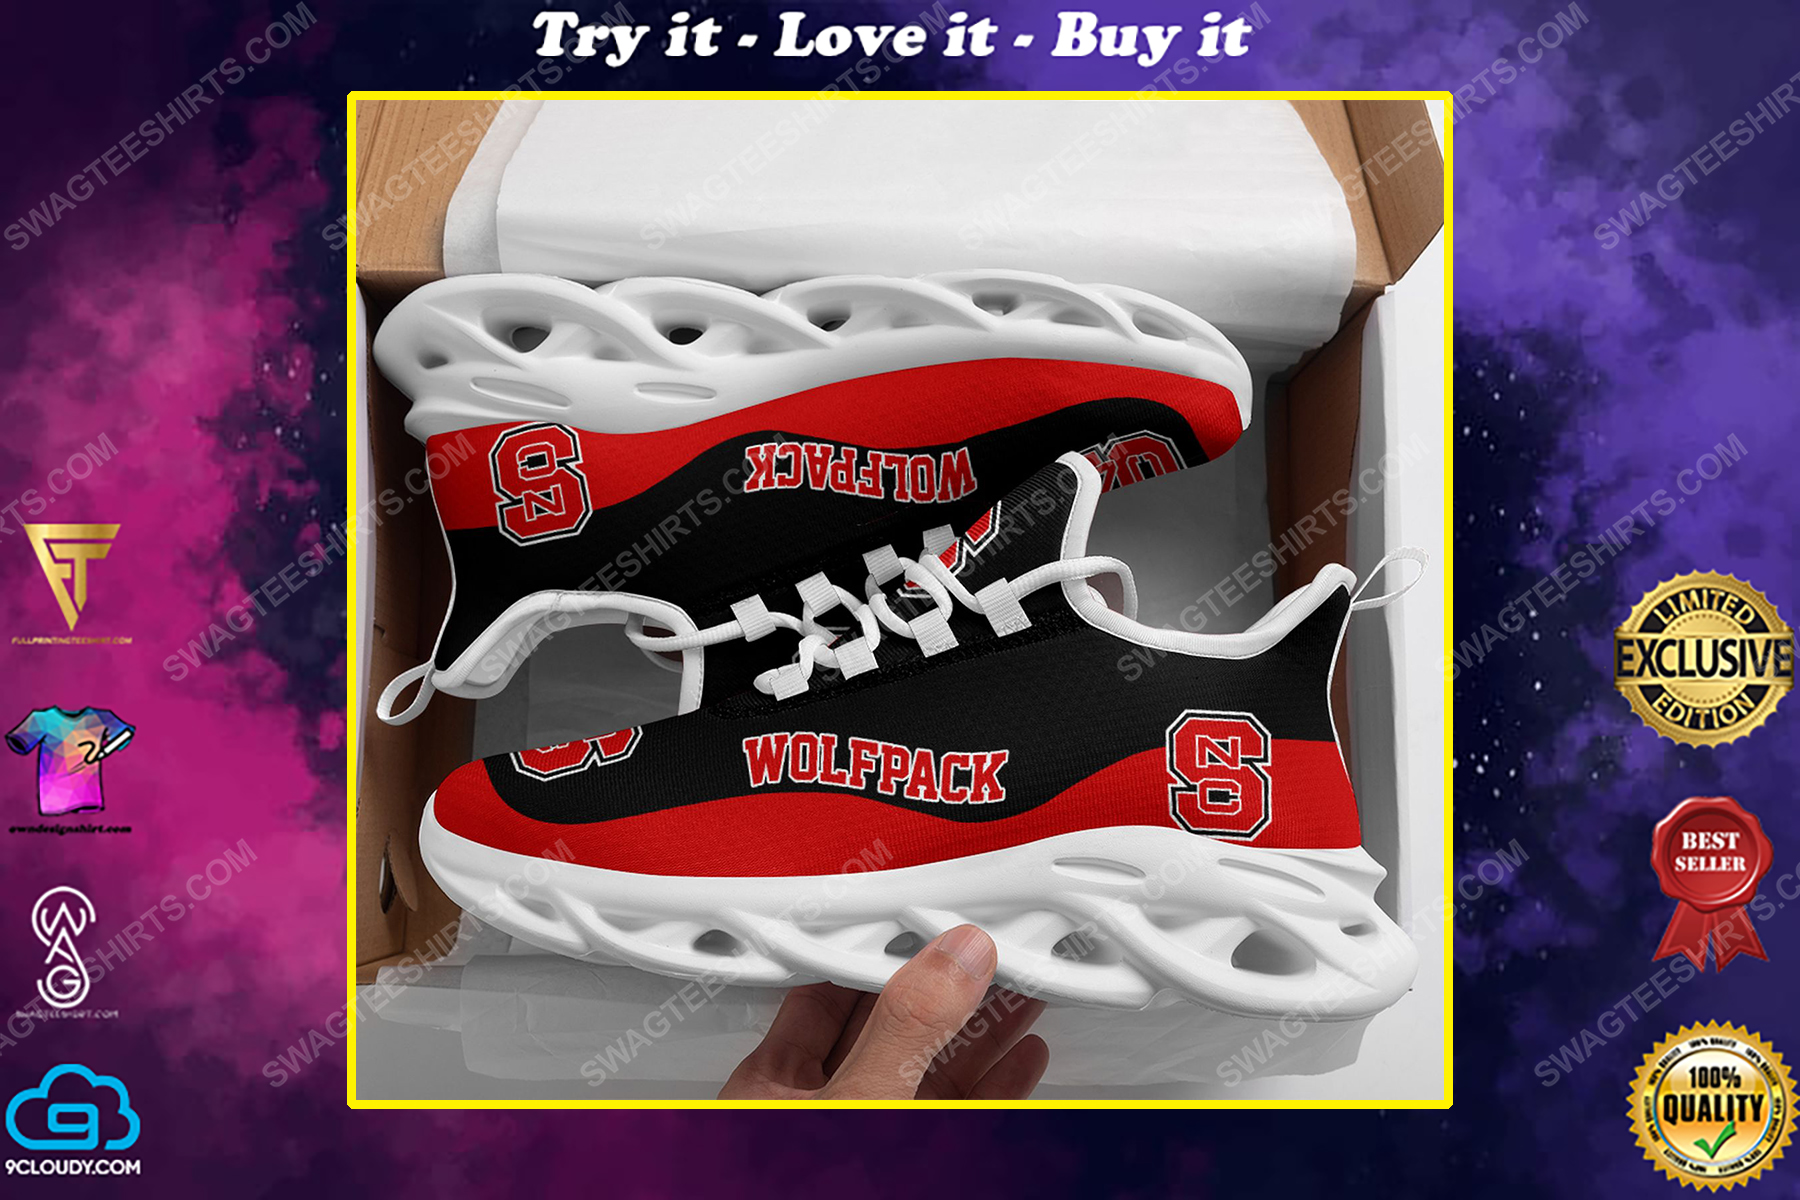 The nc state wolfpack football team max soul shoes